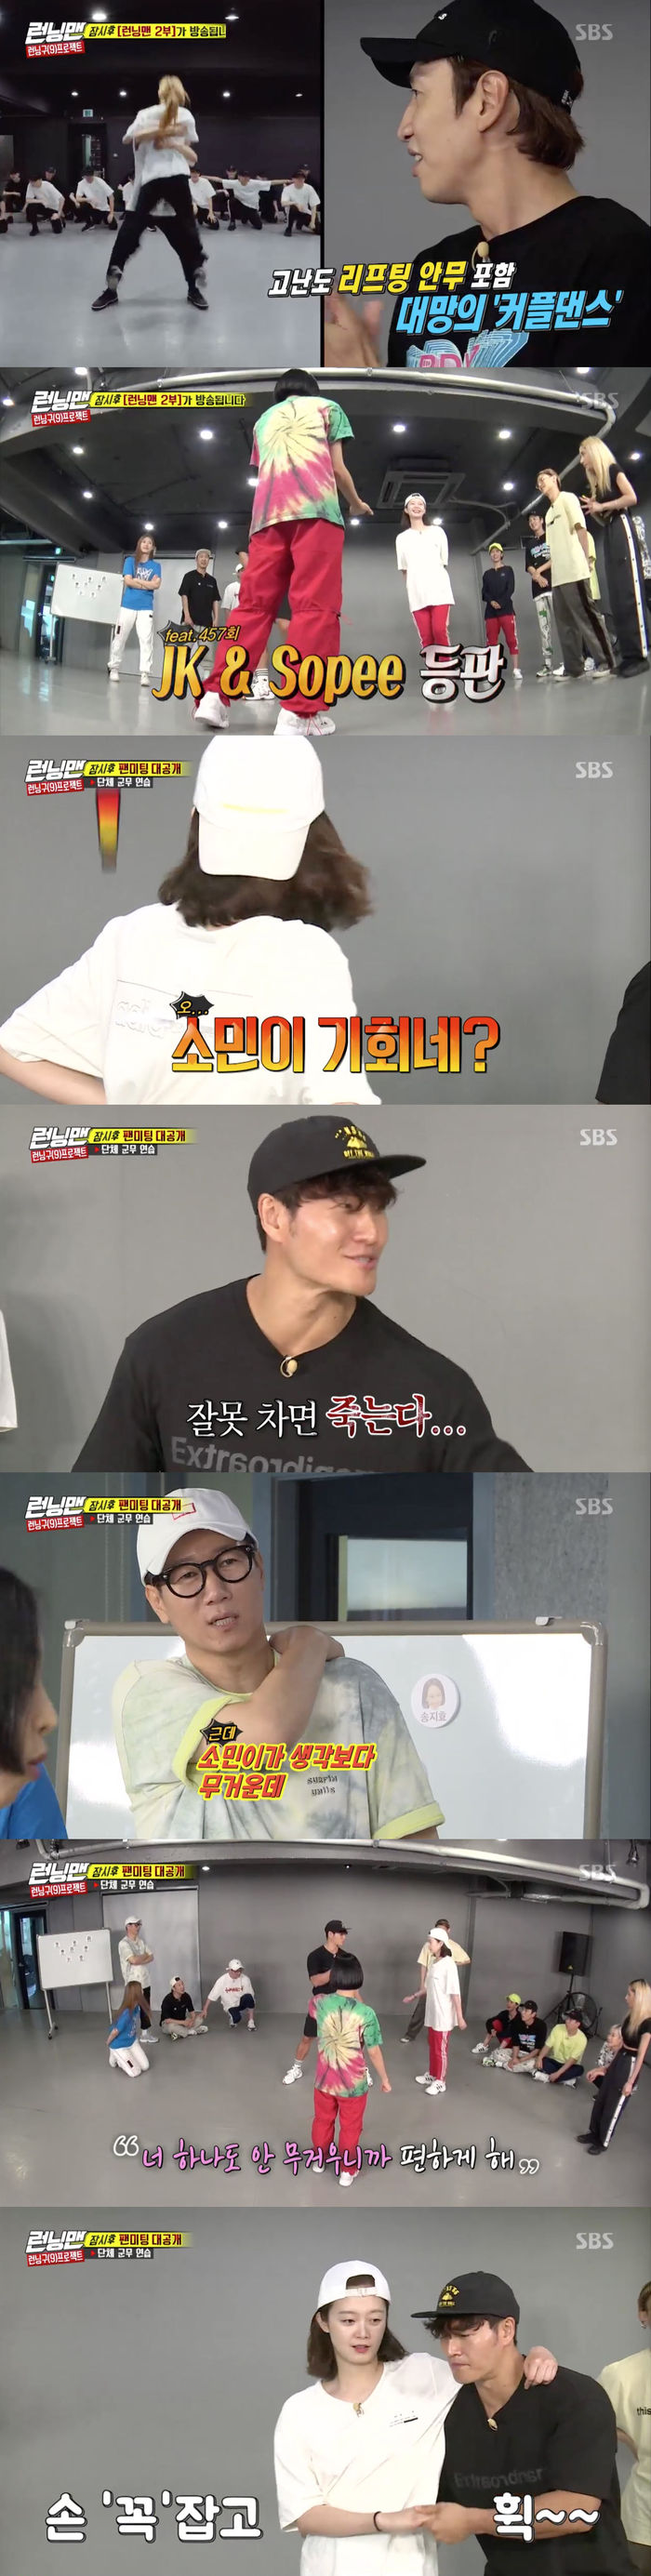 Kim Jong-kook shows off manly appearance to Jeon So-minRunning Man fan meeting was released on SBS Running Man broadcast on the 8th.On this day, Running Man visited the practice room for group dance practice to decorate the fan meeting.In particular, in the praise of Ria Kim, the lesson went smoothly: the next is a couple dance section that includes high-level lifting movements.So Kim Jong-kook and Jeon So-min took lessons, and Ria Kim explained to them each movement in a step-by-step manner.At this time, a movement appeared that Jeon So-min could kick Kim Jong-kook if he was wrong. Haha said, Somin is an opportunity.It is an opportunity to send a talented Kim Jong-kook in one room.Kim Jong-kook, in response, put it up well - if you kick it wrong, you die.And Ji Suk-jin worried about Kim Jong-kook, saying, Somin is heavier than I thought.However, Kim Jong-kook showed a strong appearance to Jeon So-min, You are not heavy, so make it comfortable. Thanks to Kim Jong-kook, Jeon So-min completed the lifting motion comfortably and attracted attention.